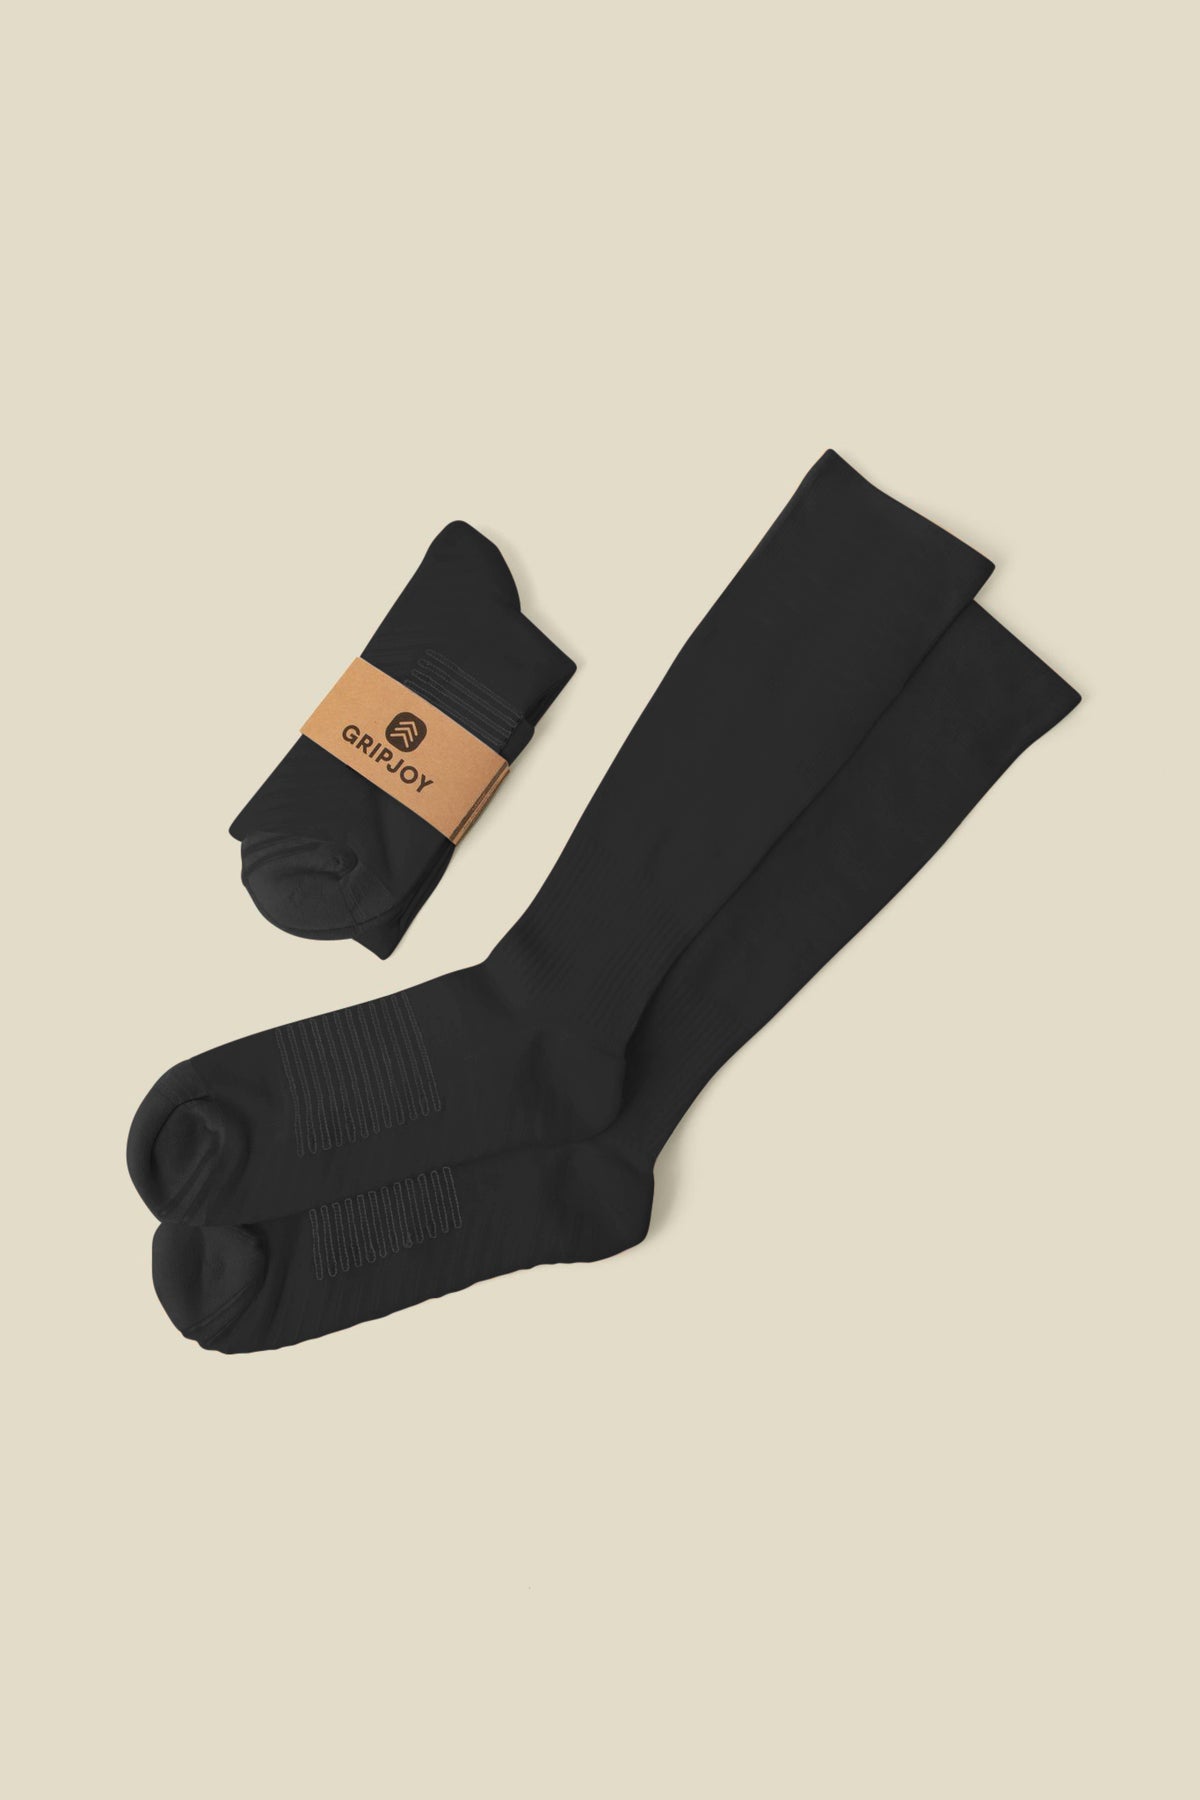 Men&#39;s Black Compression Socks with Grips - 2 Pairs - Gripjoy Socks